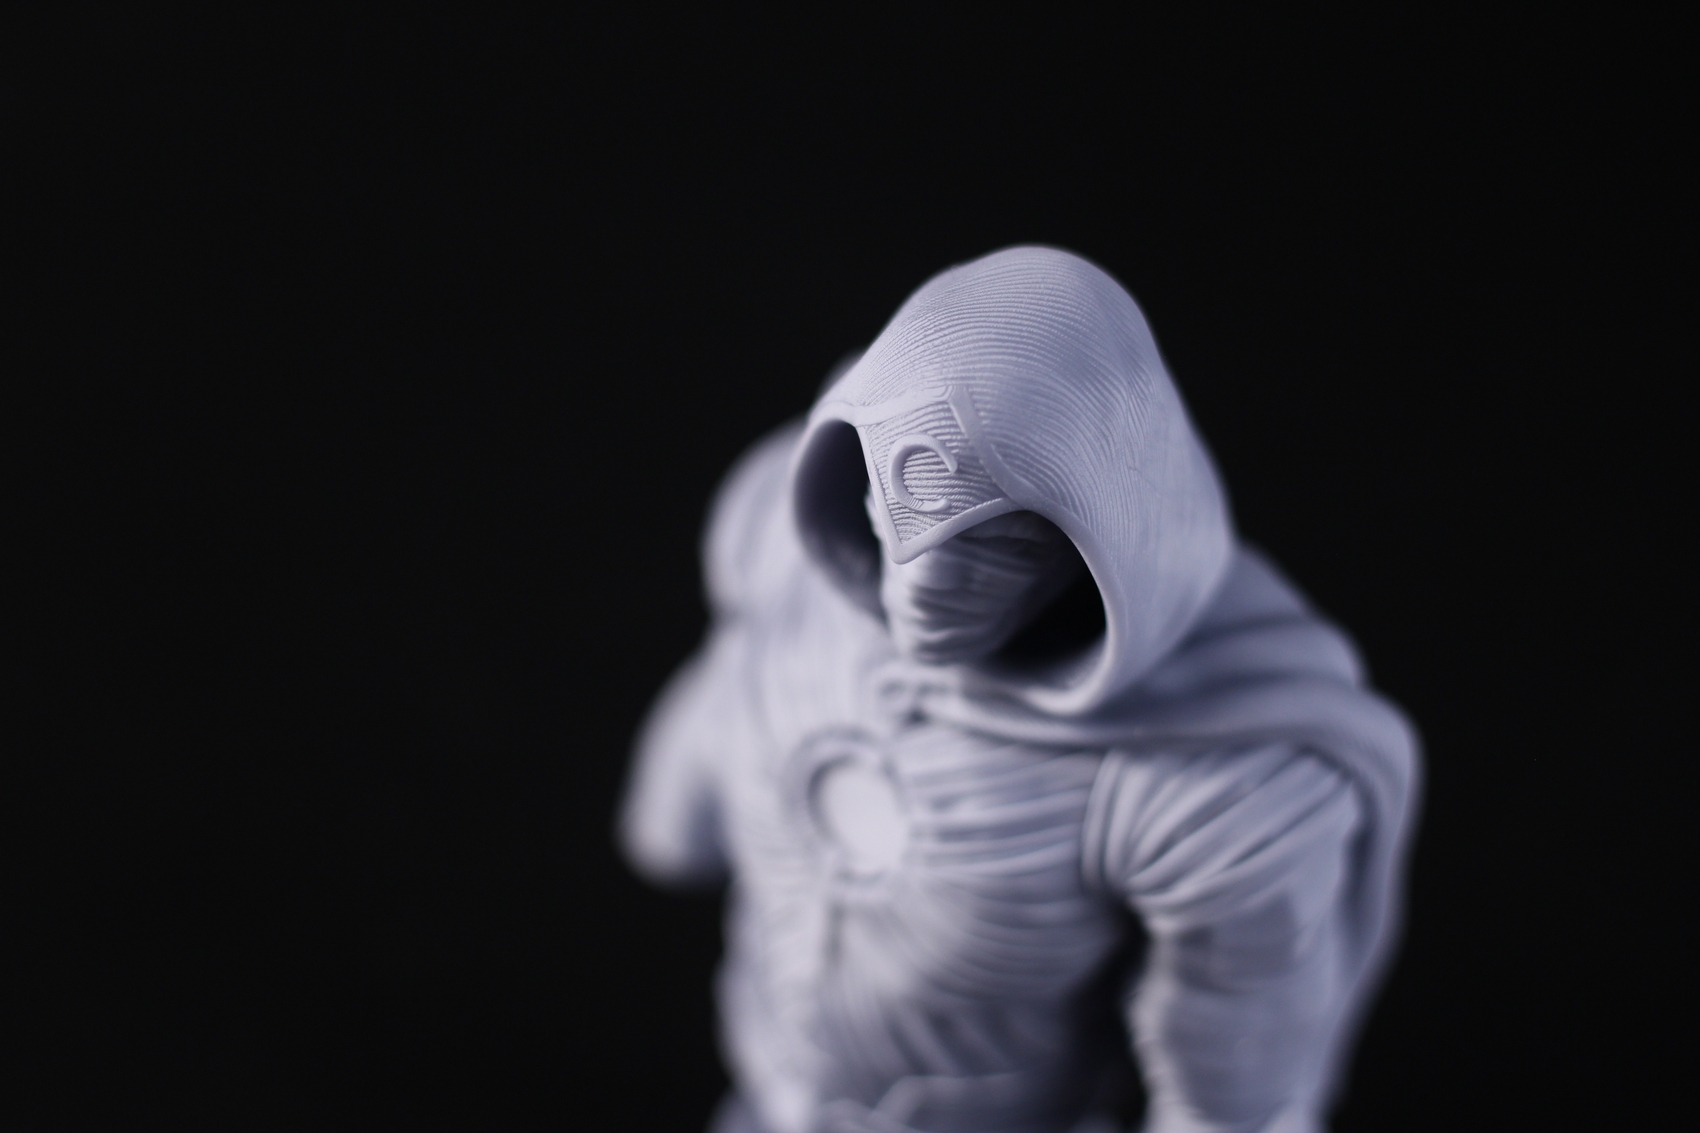 Moon Knight Bust Anycubic Photon M3 Review6 | Anycubic Photon M3 Review: Bridging the gap